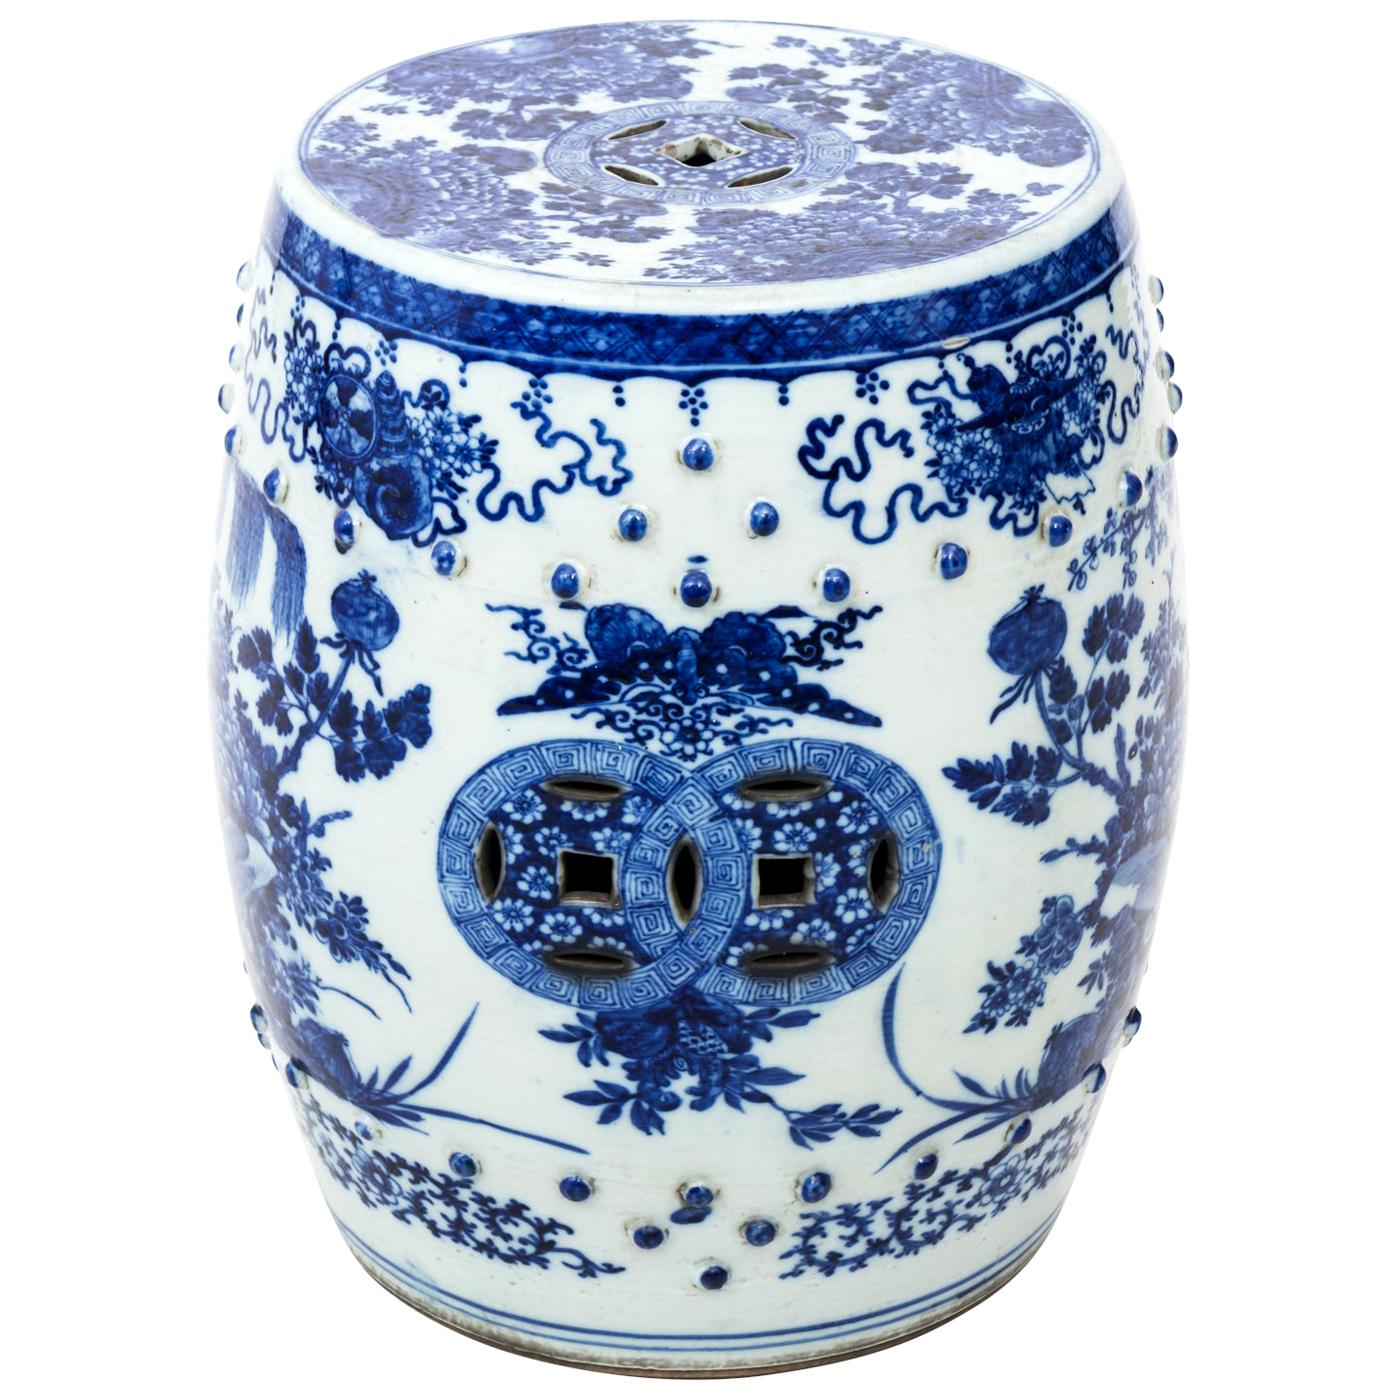 Painted Blue and White Chinese Porcelain Garden Seat